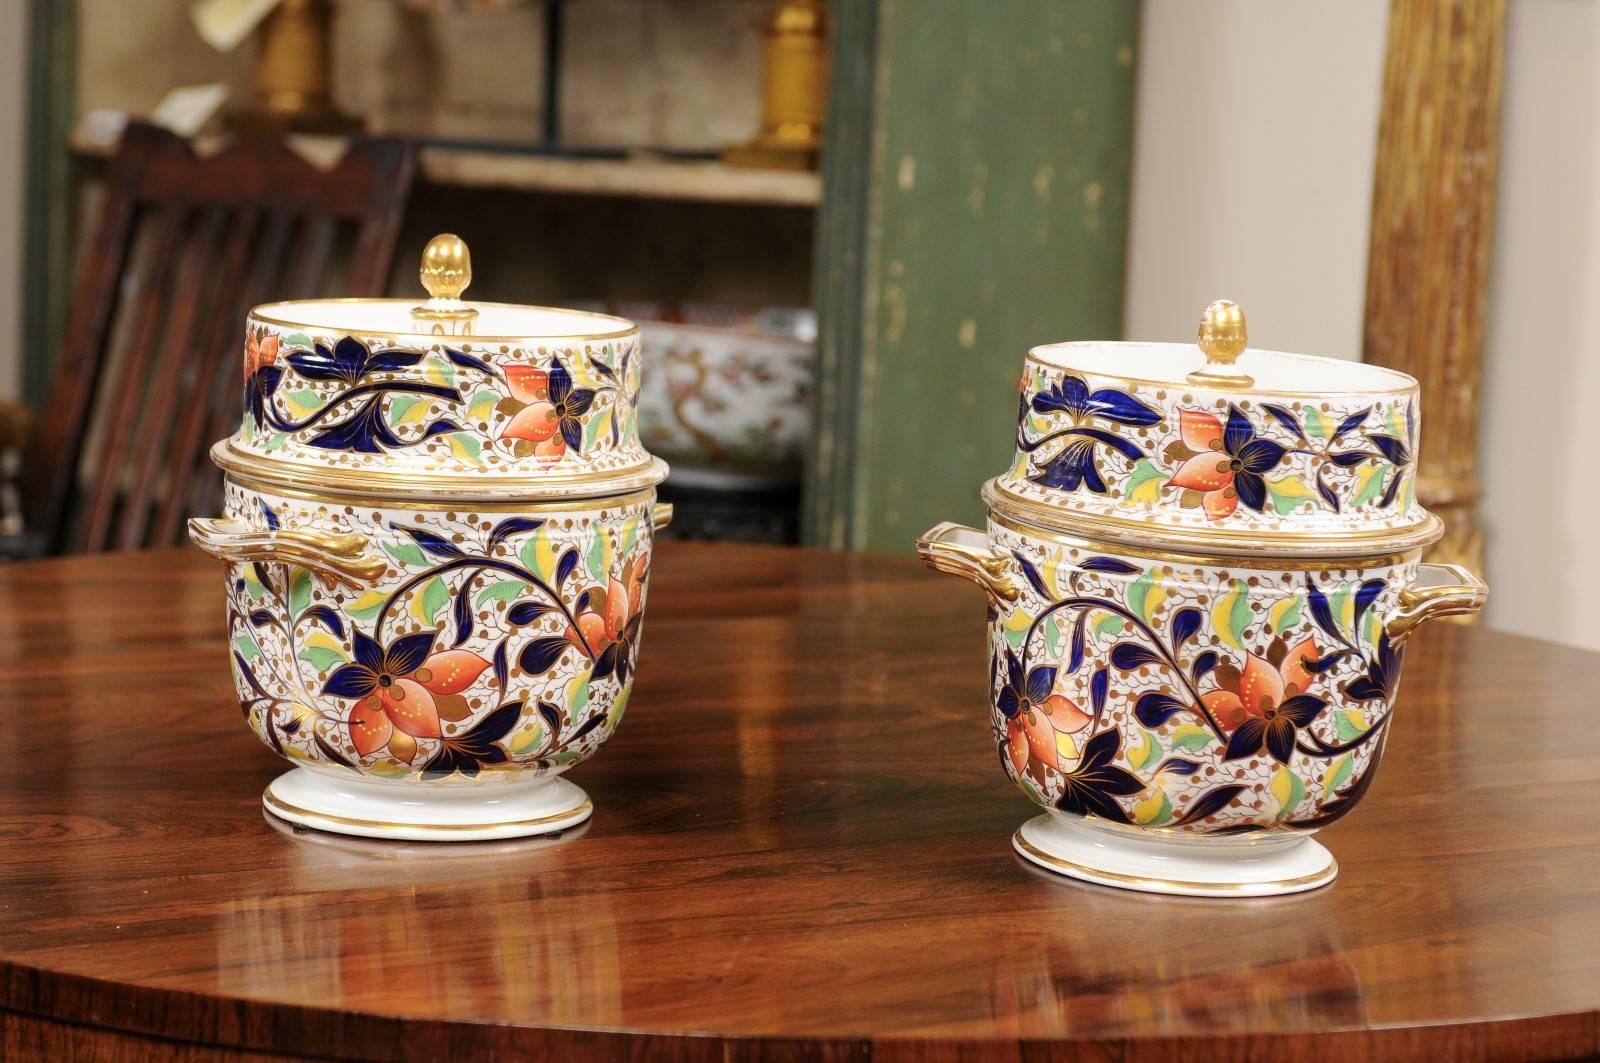 Pair of 19th century English Derby Fruit Coolers with Lids & Liners, ca. 1815.
   